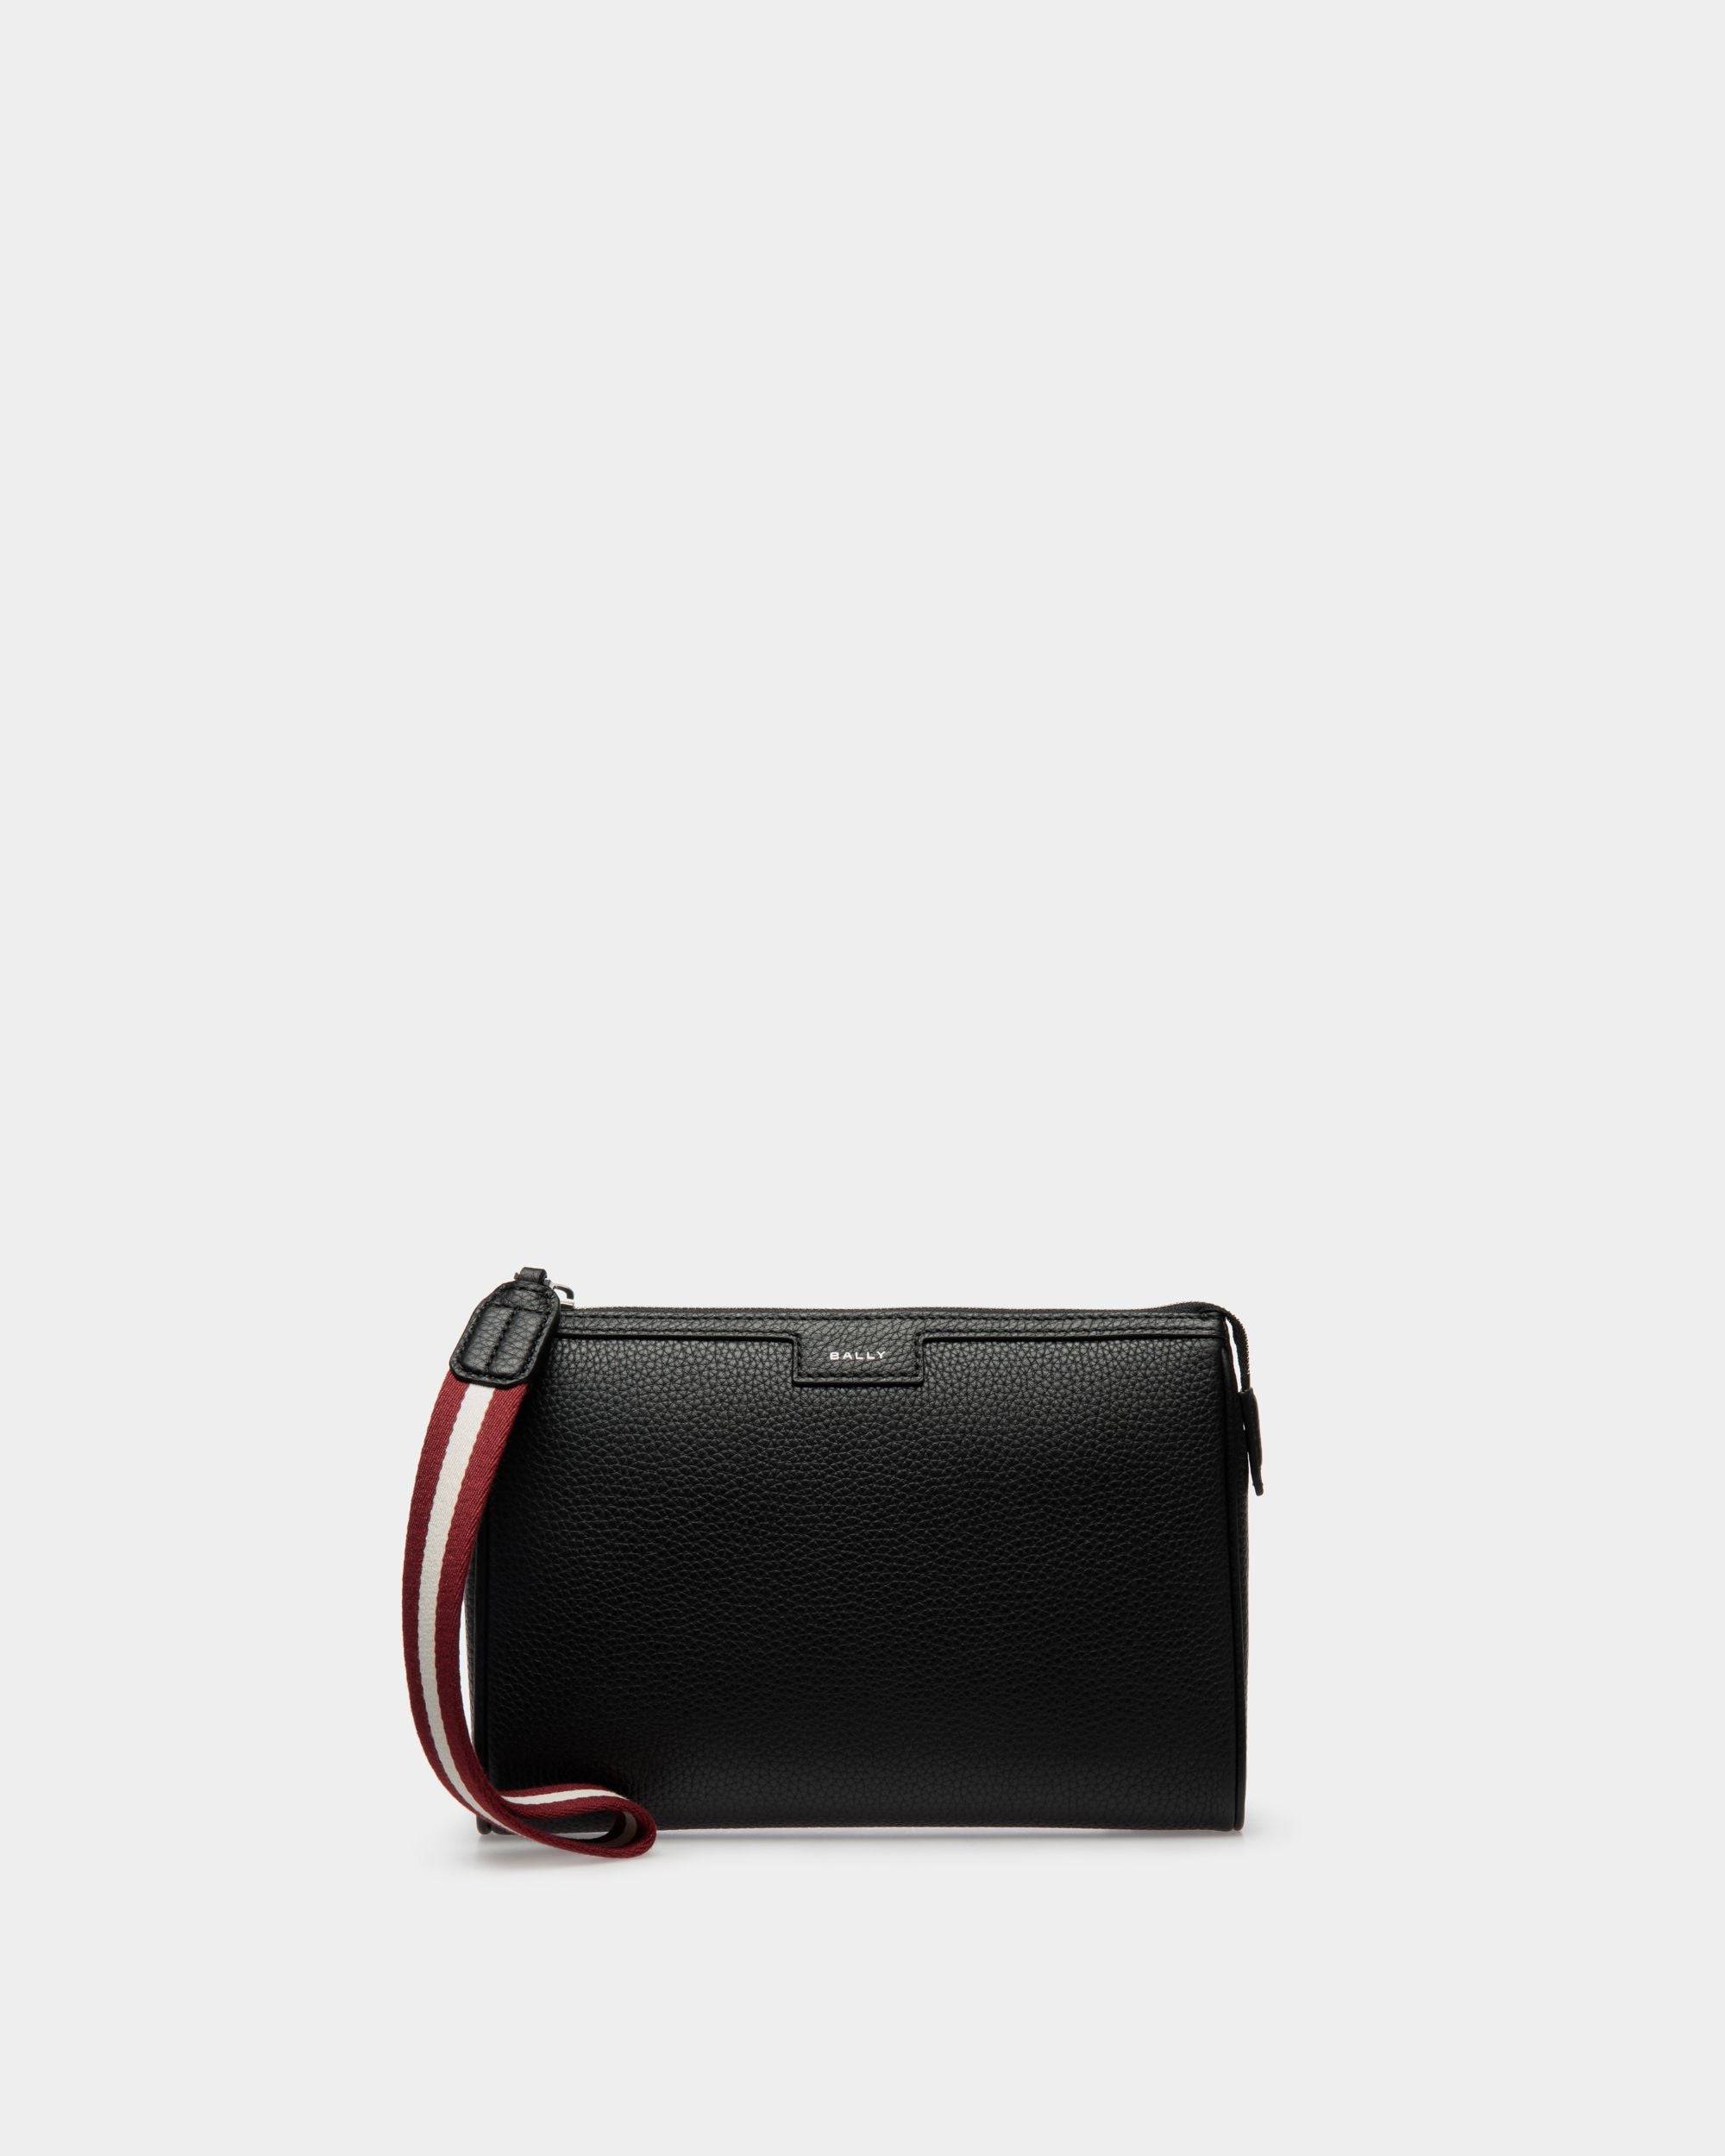 Code | Men's Pouch in Black Grained Leather | Bally | Still Life Front